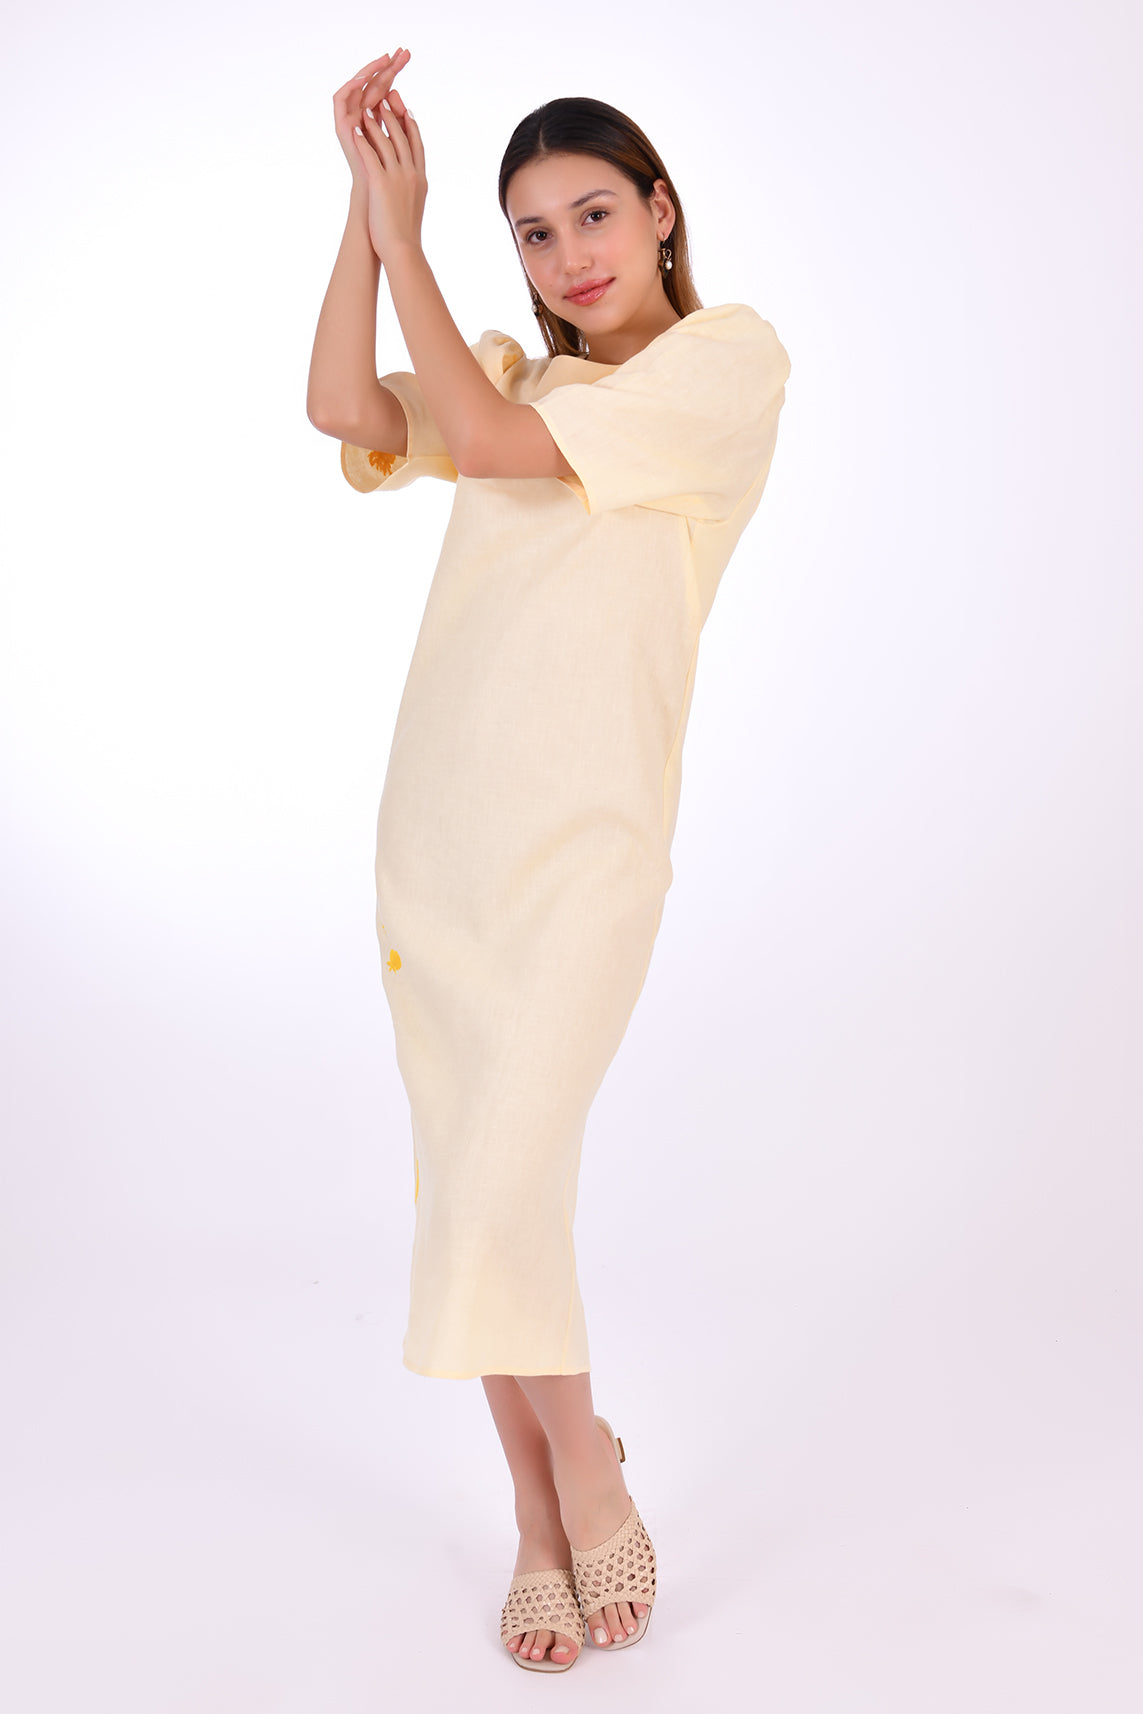 Fanm Mon Doga Midi Linen Dress, Side View (not belted). Short Sleeve 100% Linen Dress, featuring a peephole open back and button closure. Round neck, with a belt for the waist (can be worn with or without), and features front embroidery detail.